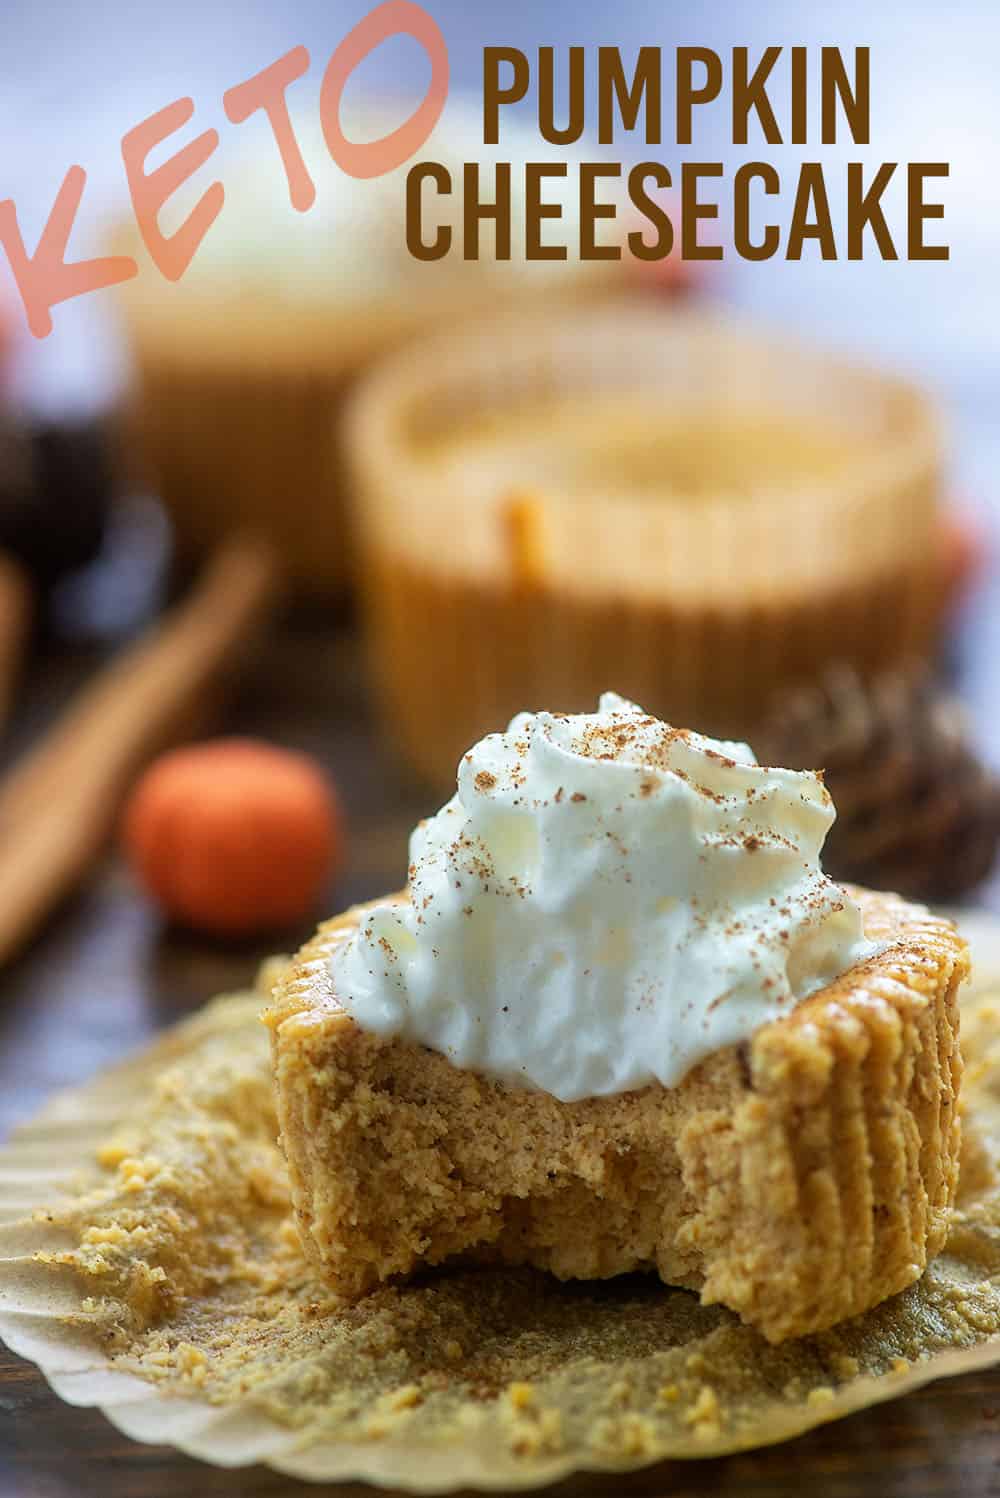 A close up of pumpkin cheesecake with a bite taken out of it.